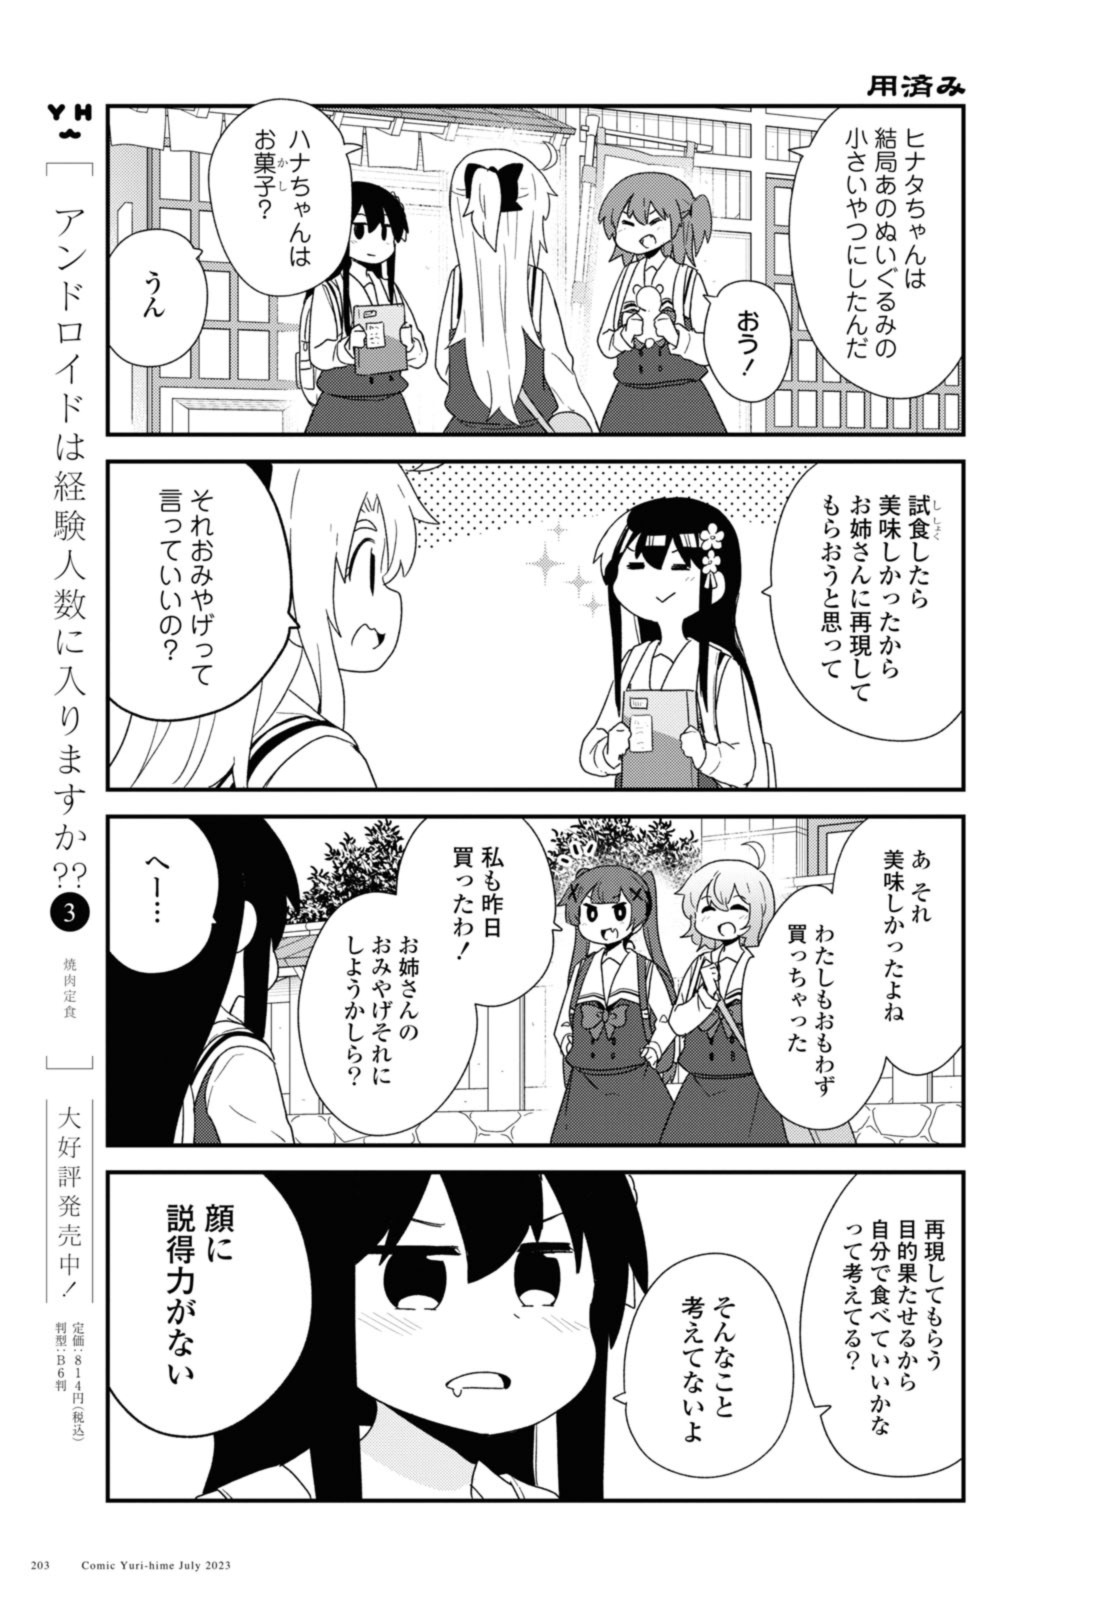 Wataten! An Angel Flew Down to Me 私に天使が舞い降りた！ 第107話 - Page 11